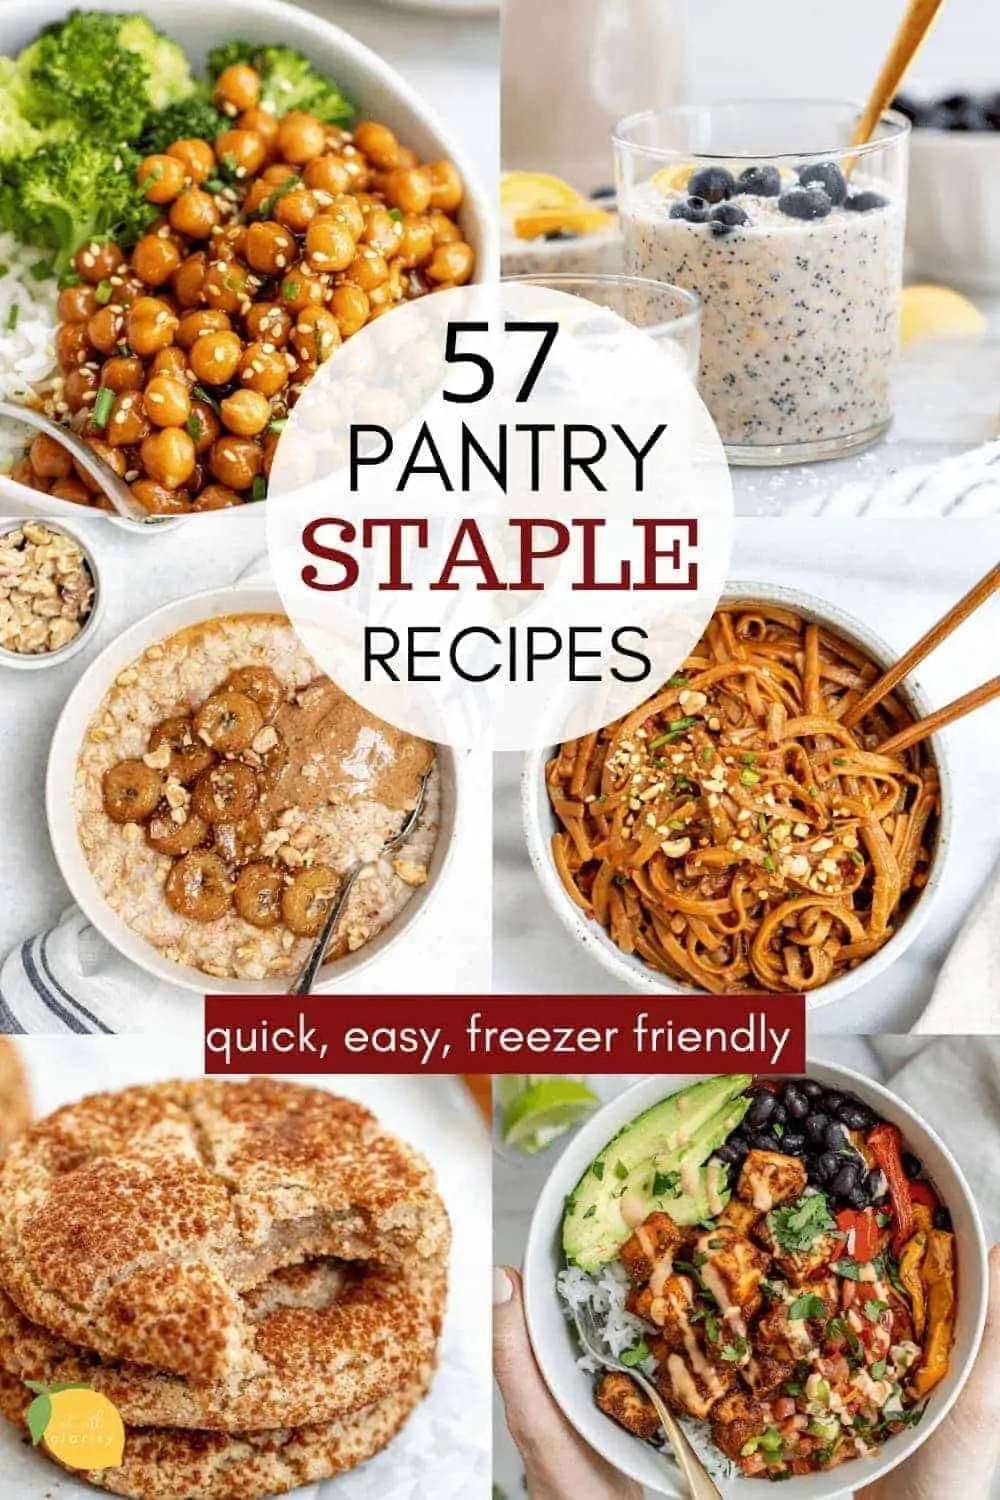 Collage showing pantry staple recipes.